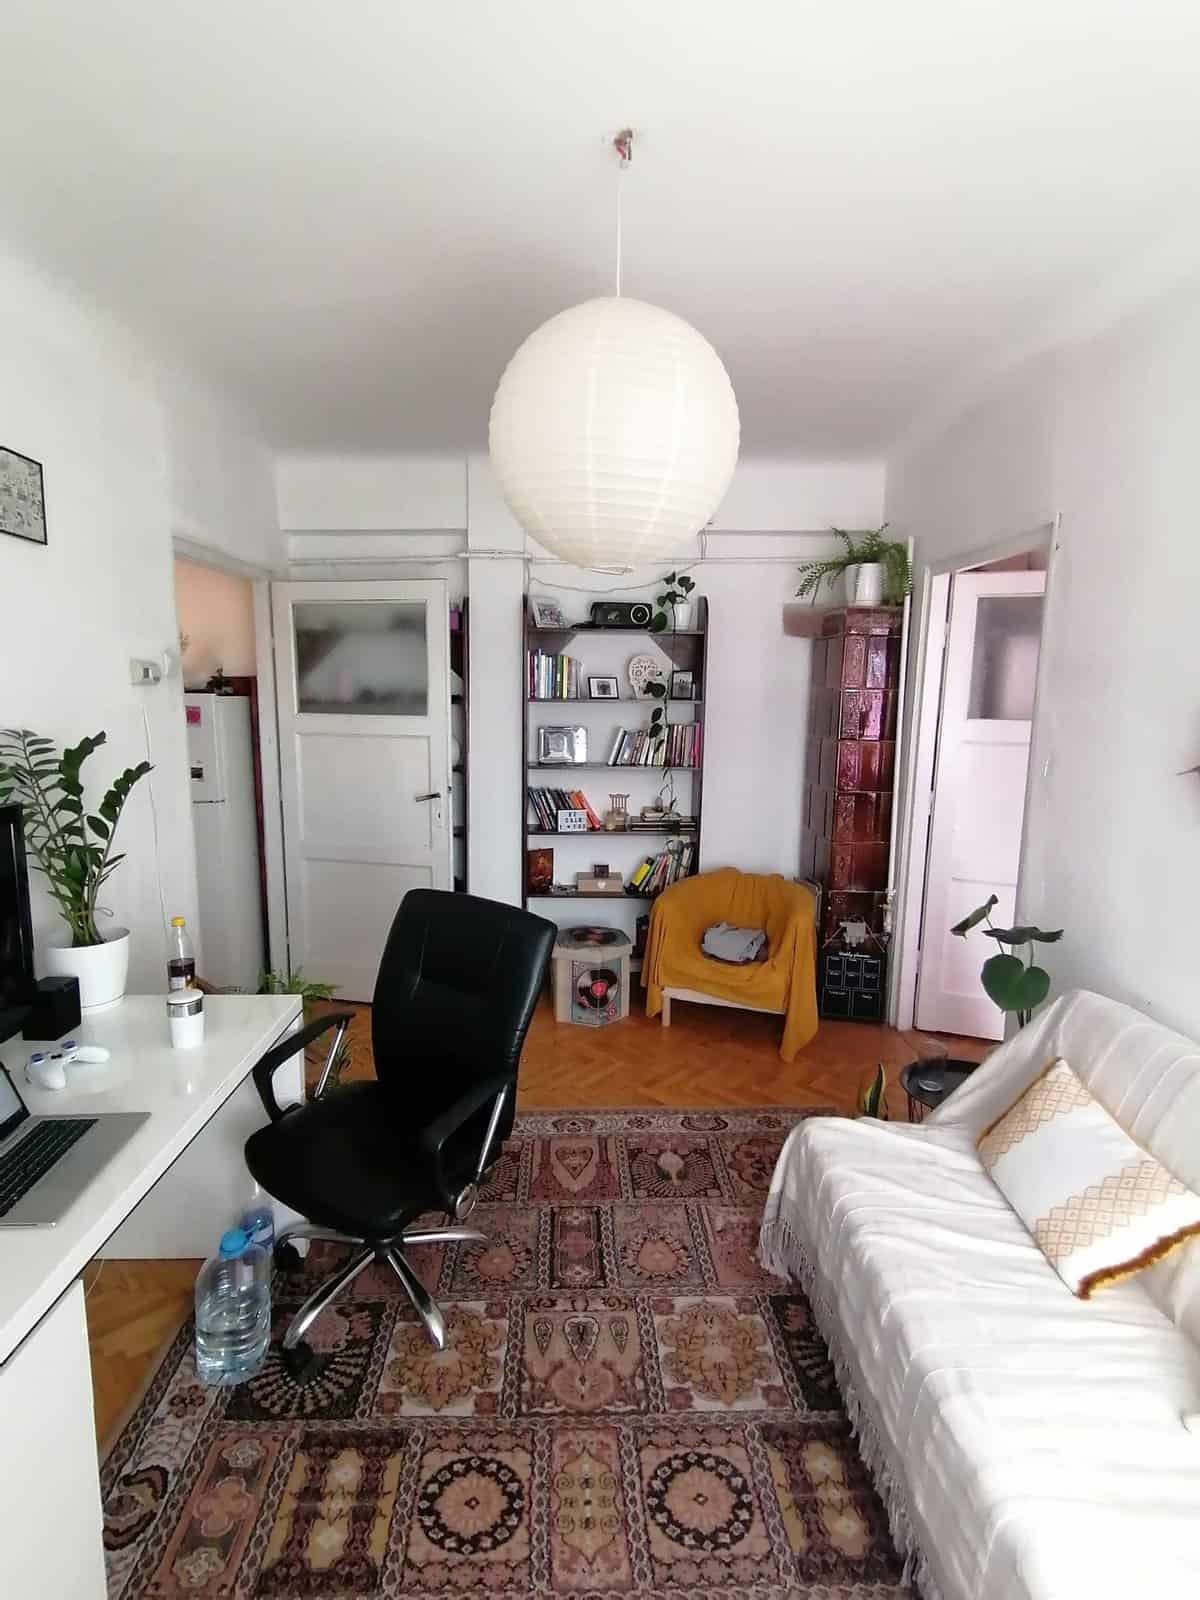 May be an image of living room